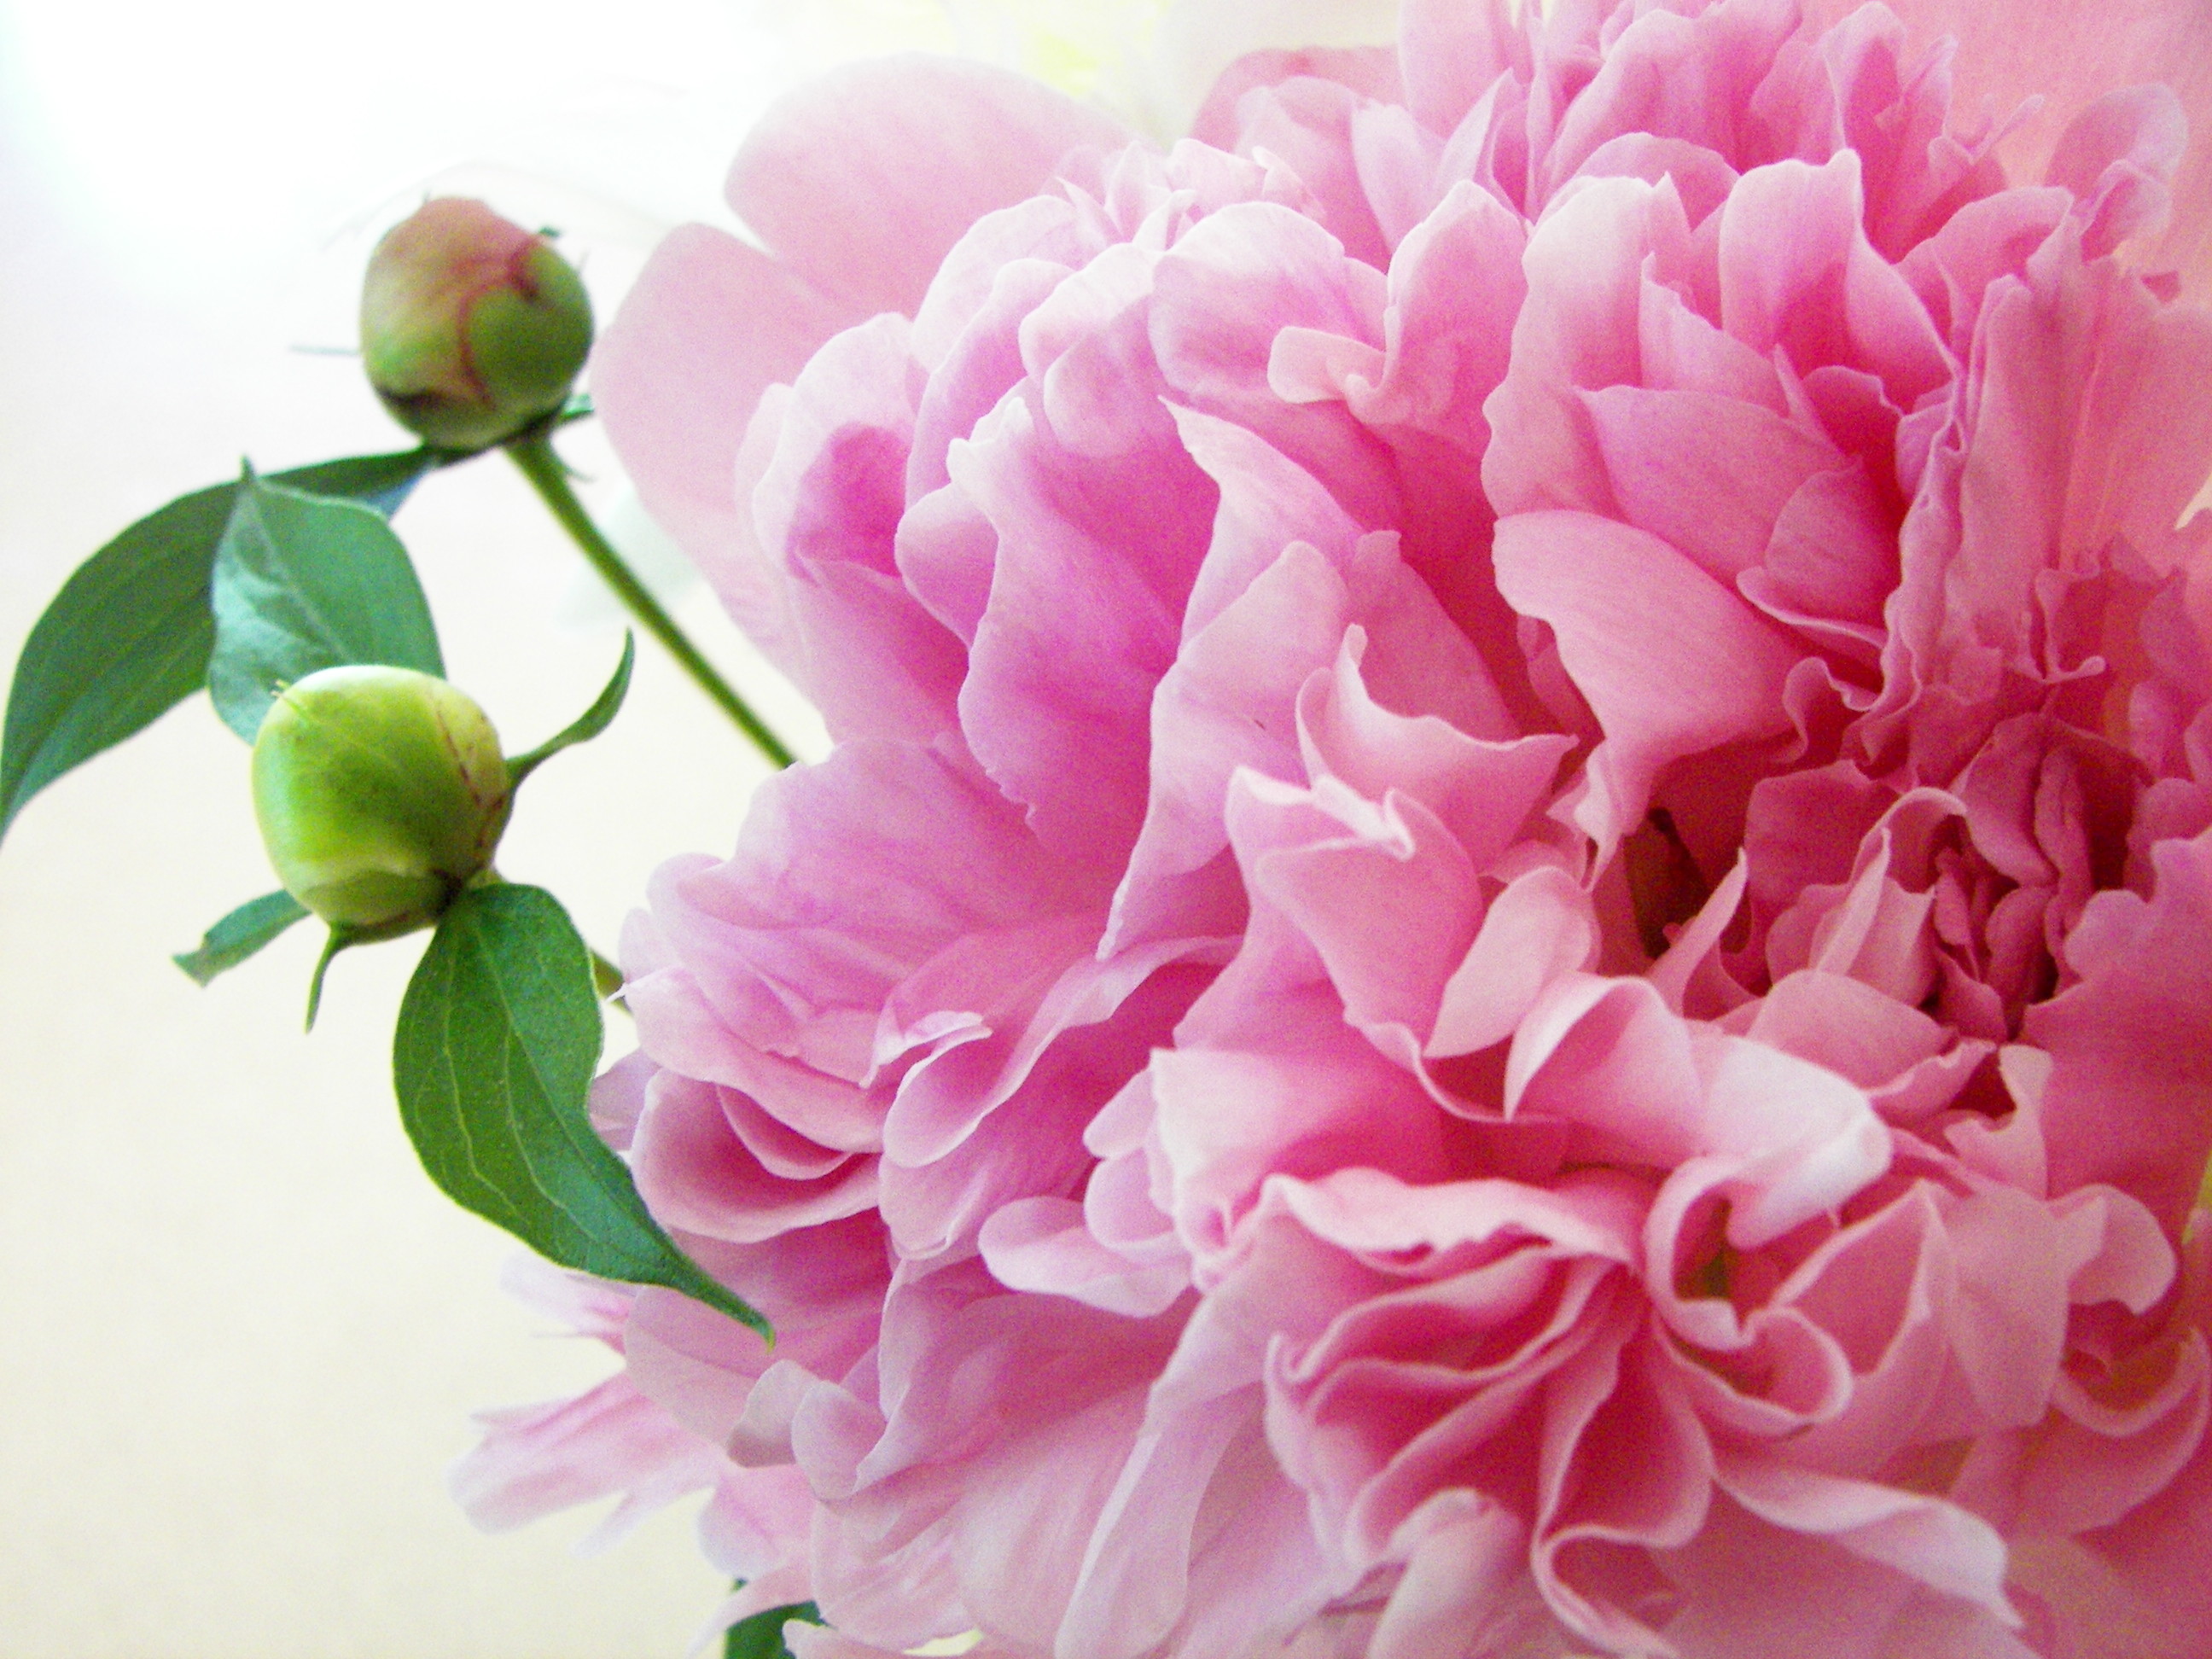 Peony, my all time favorite flower And, I imagine that is what heaven smells like. the peony flower